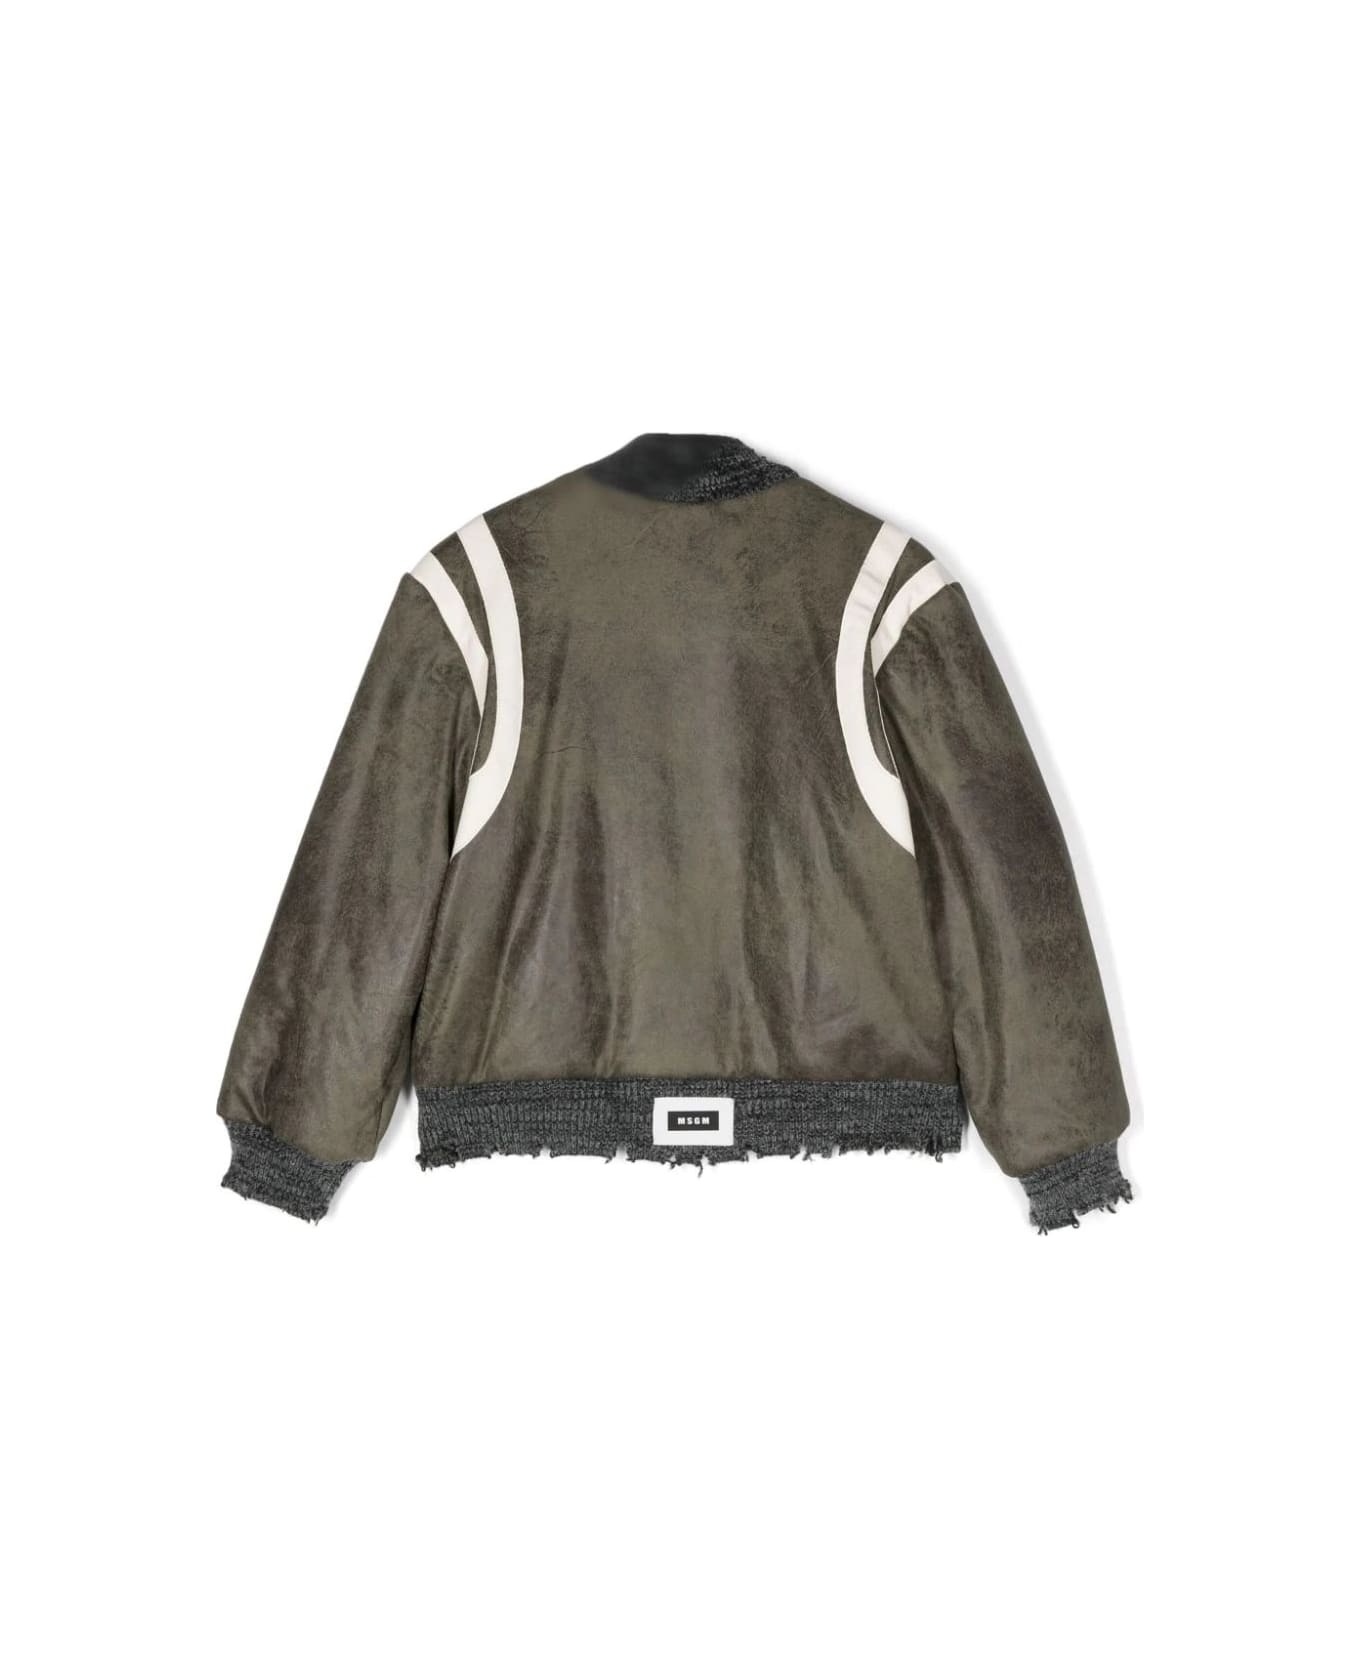 MSGM Forest Green Bomber Jacket With Contrast Edging - Verde